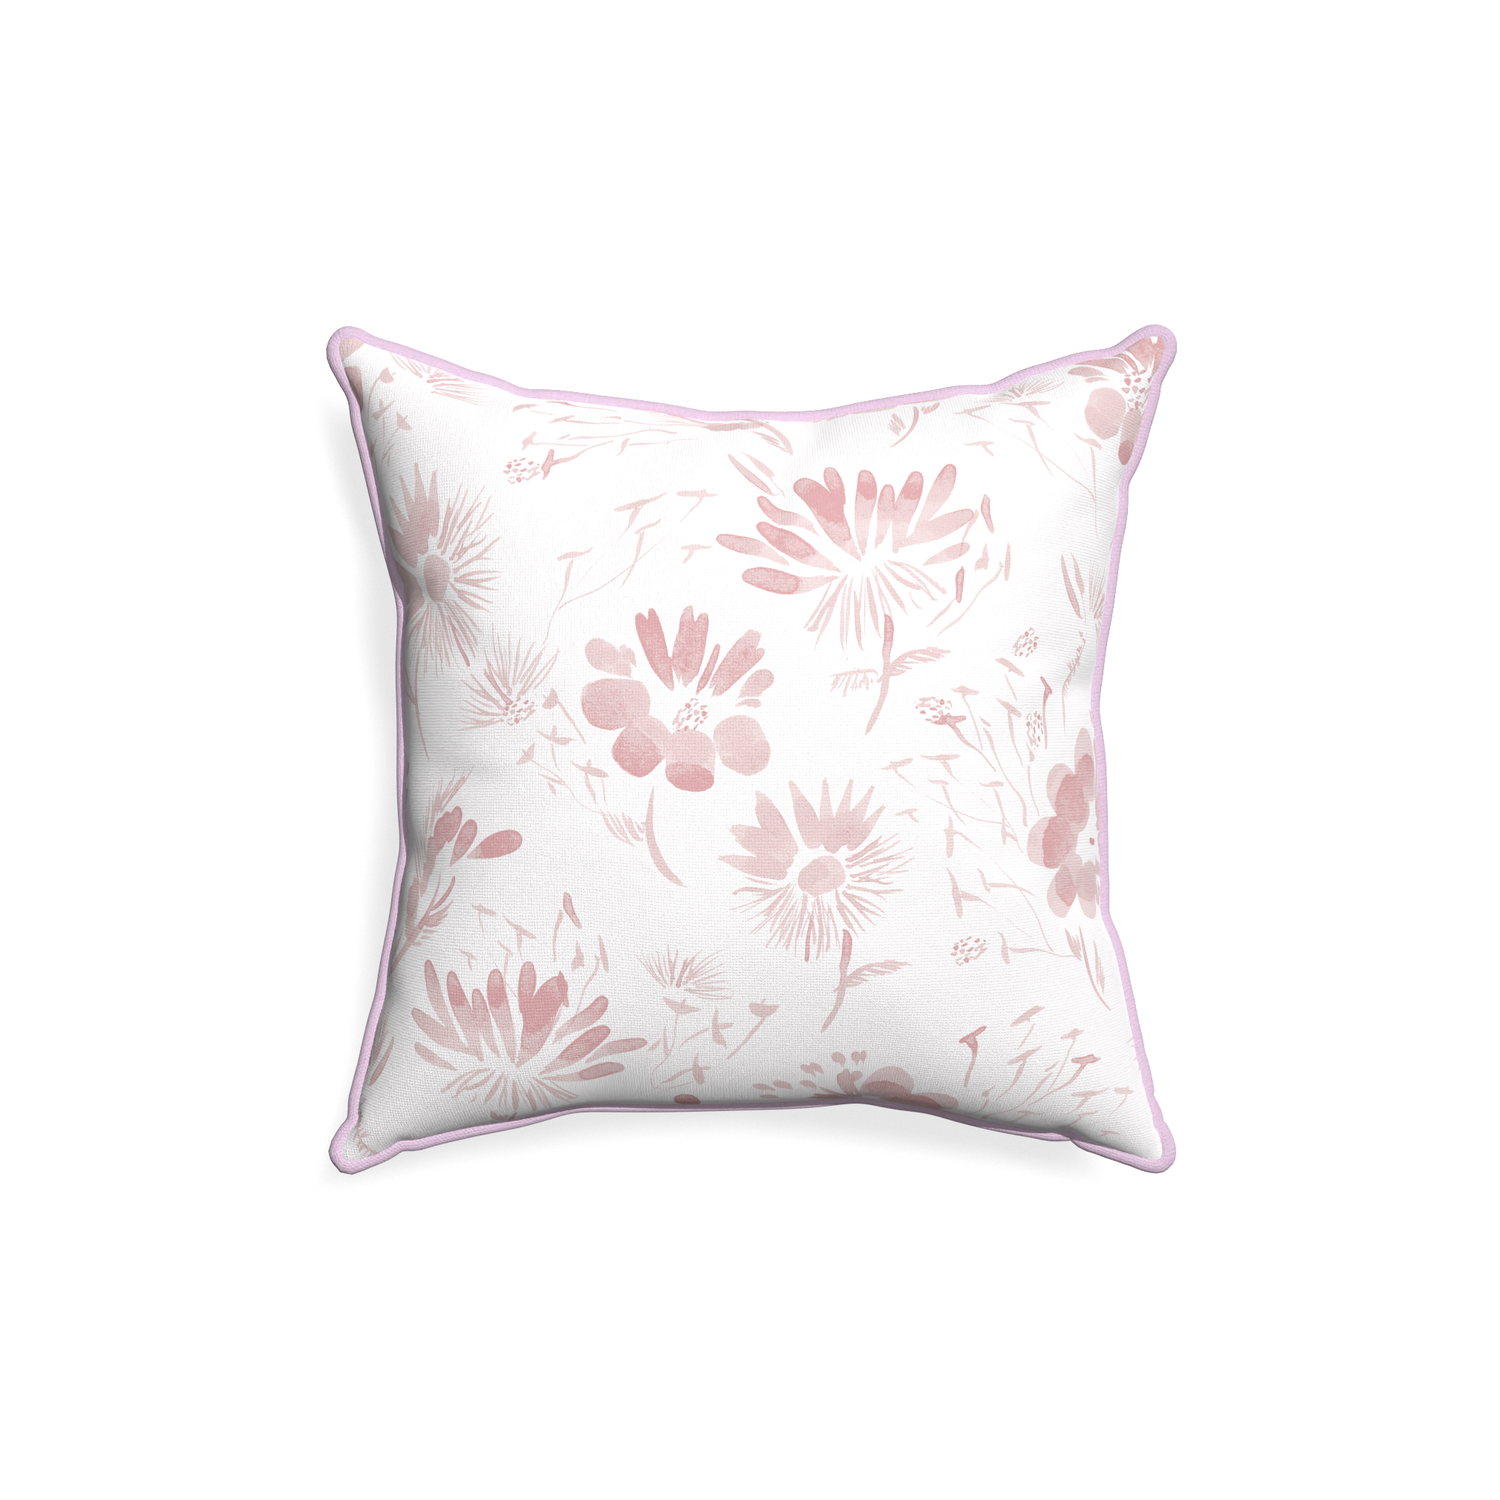 18-square blake custom pillow with l piping on white background